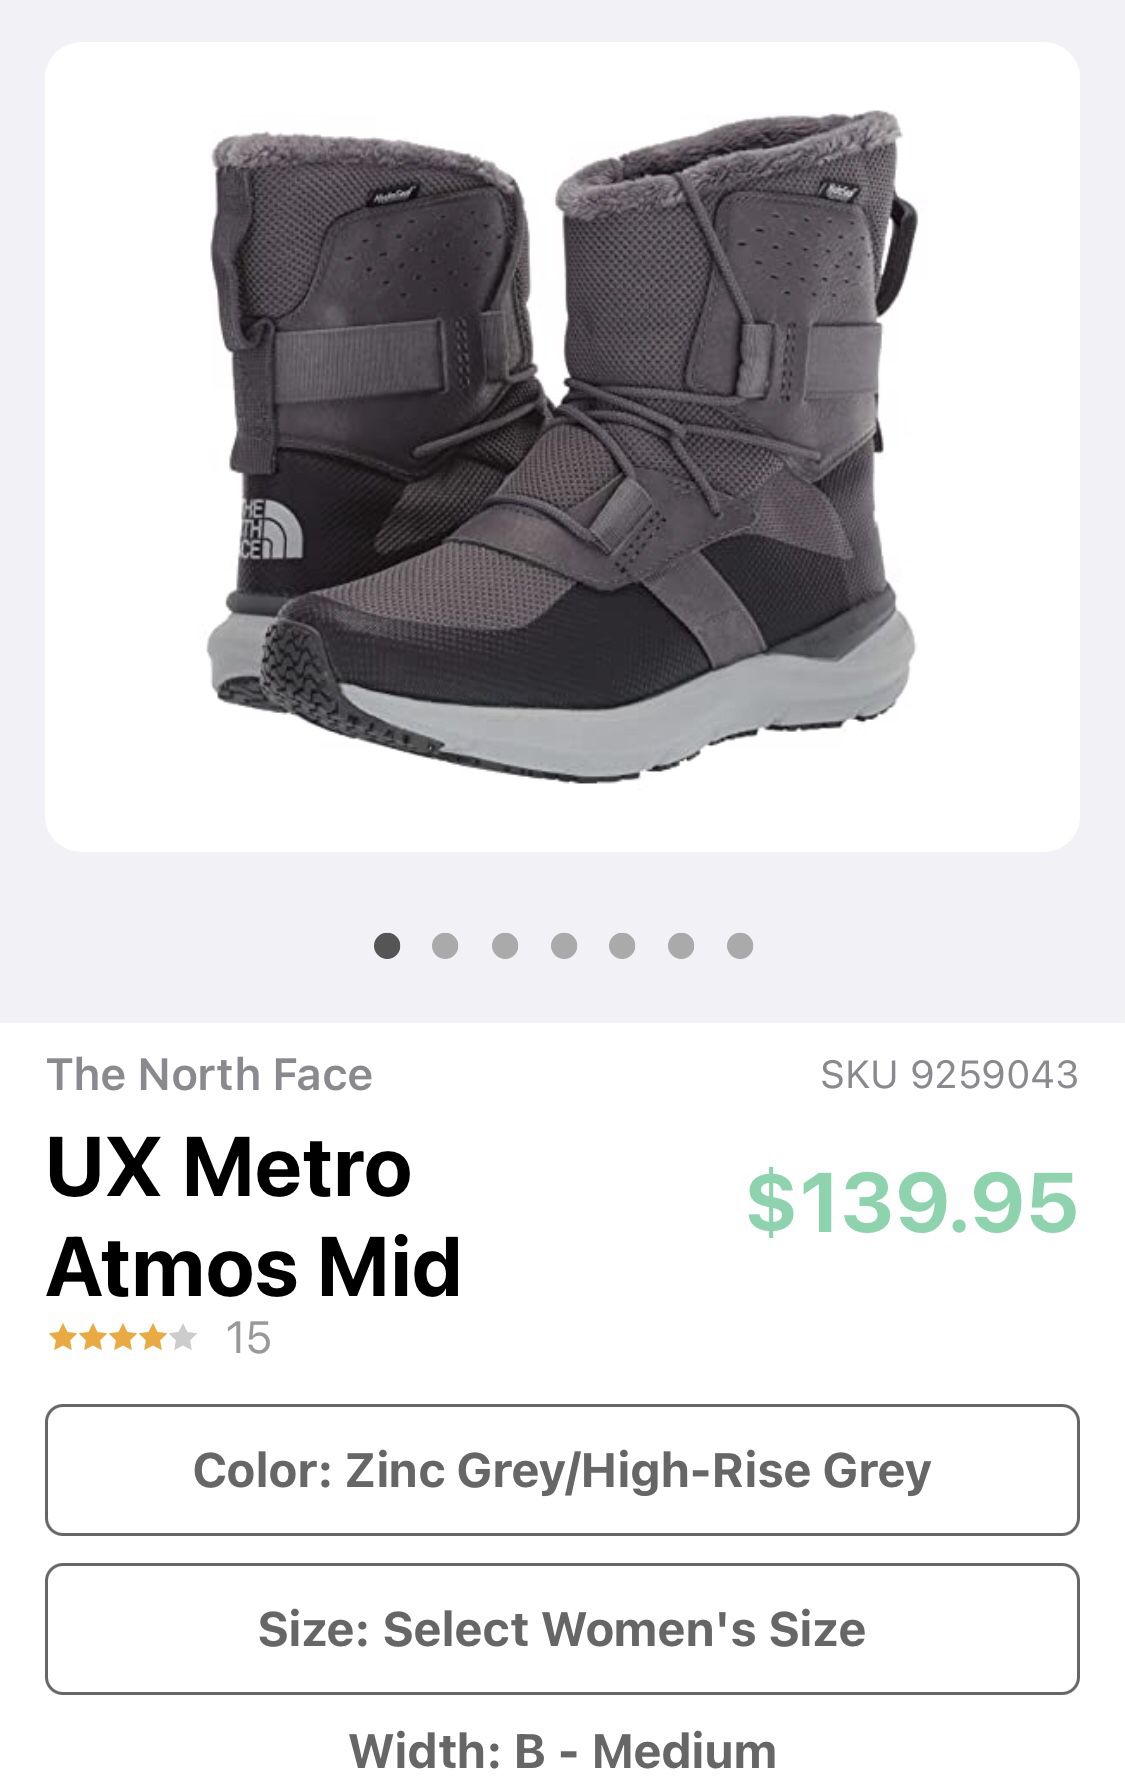 The North Face Snow Boots Woman’s 7.5 New 